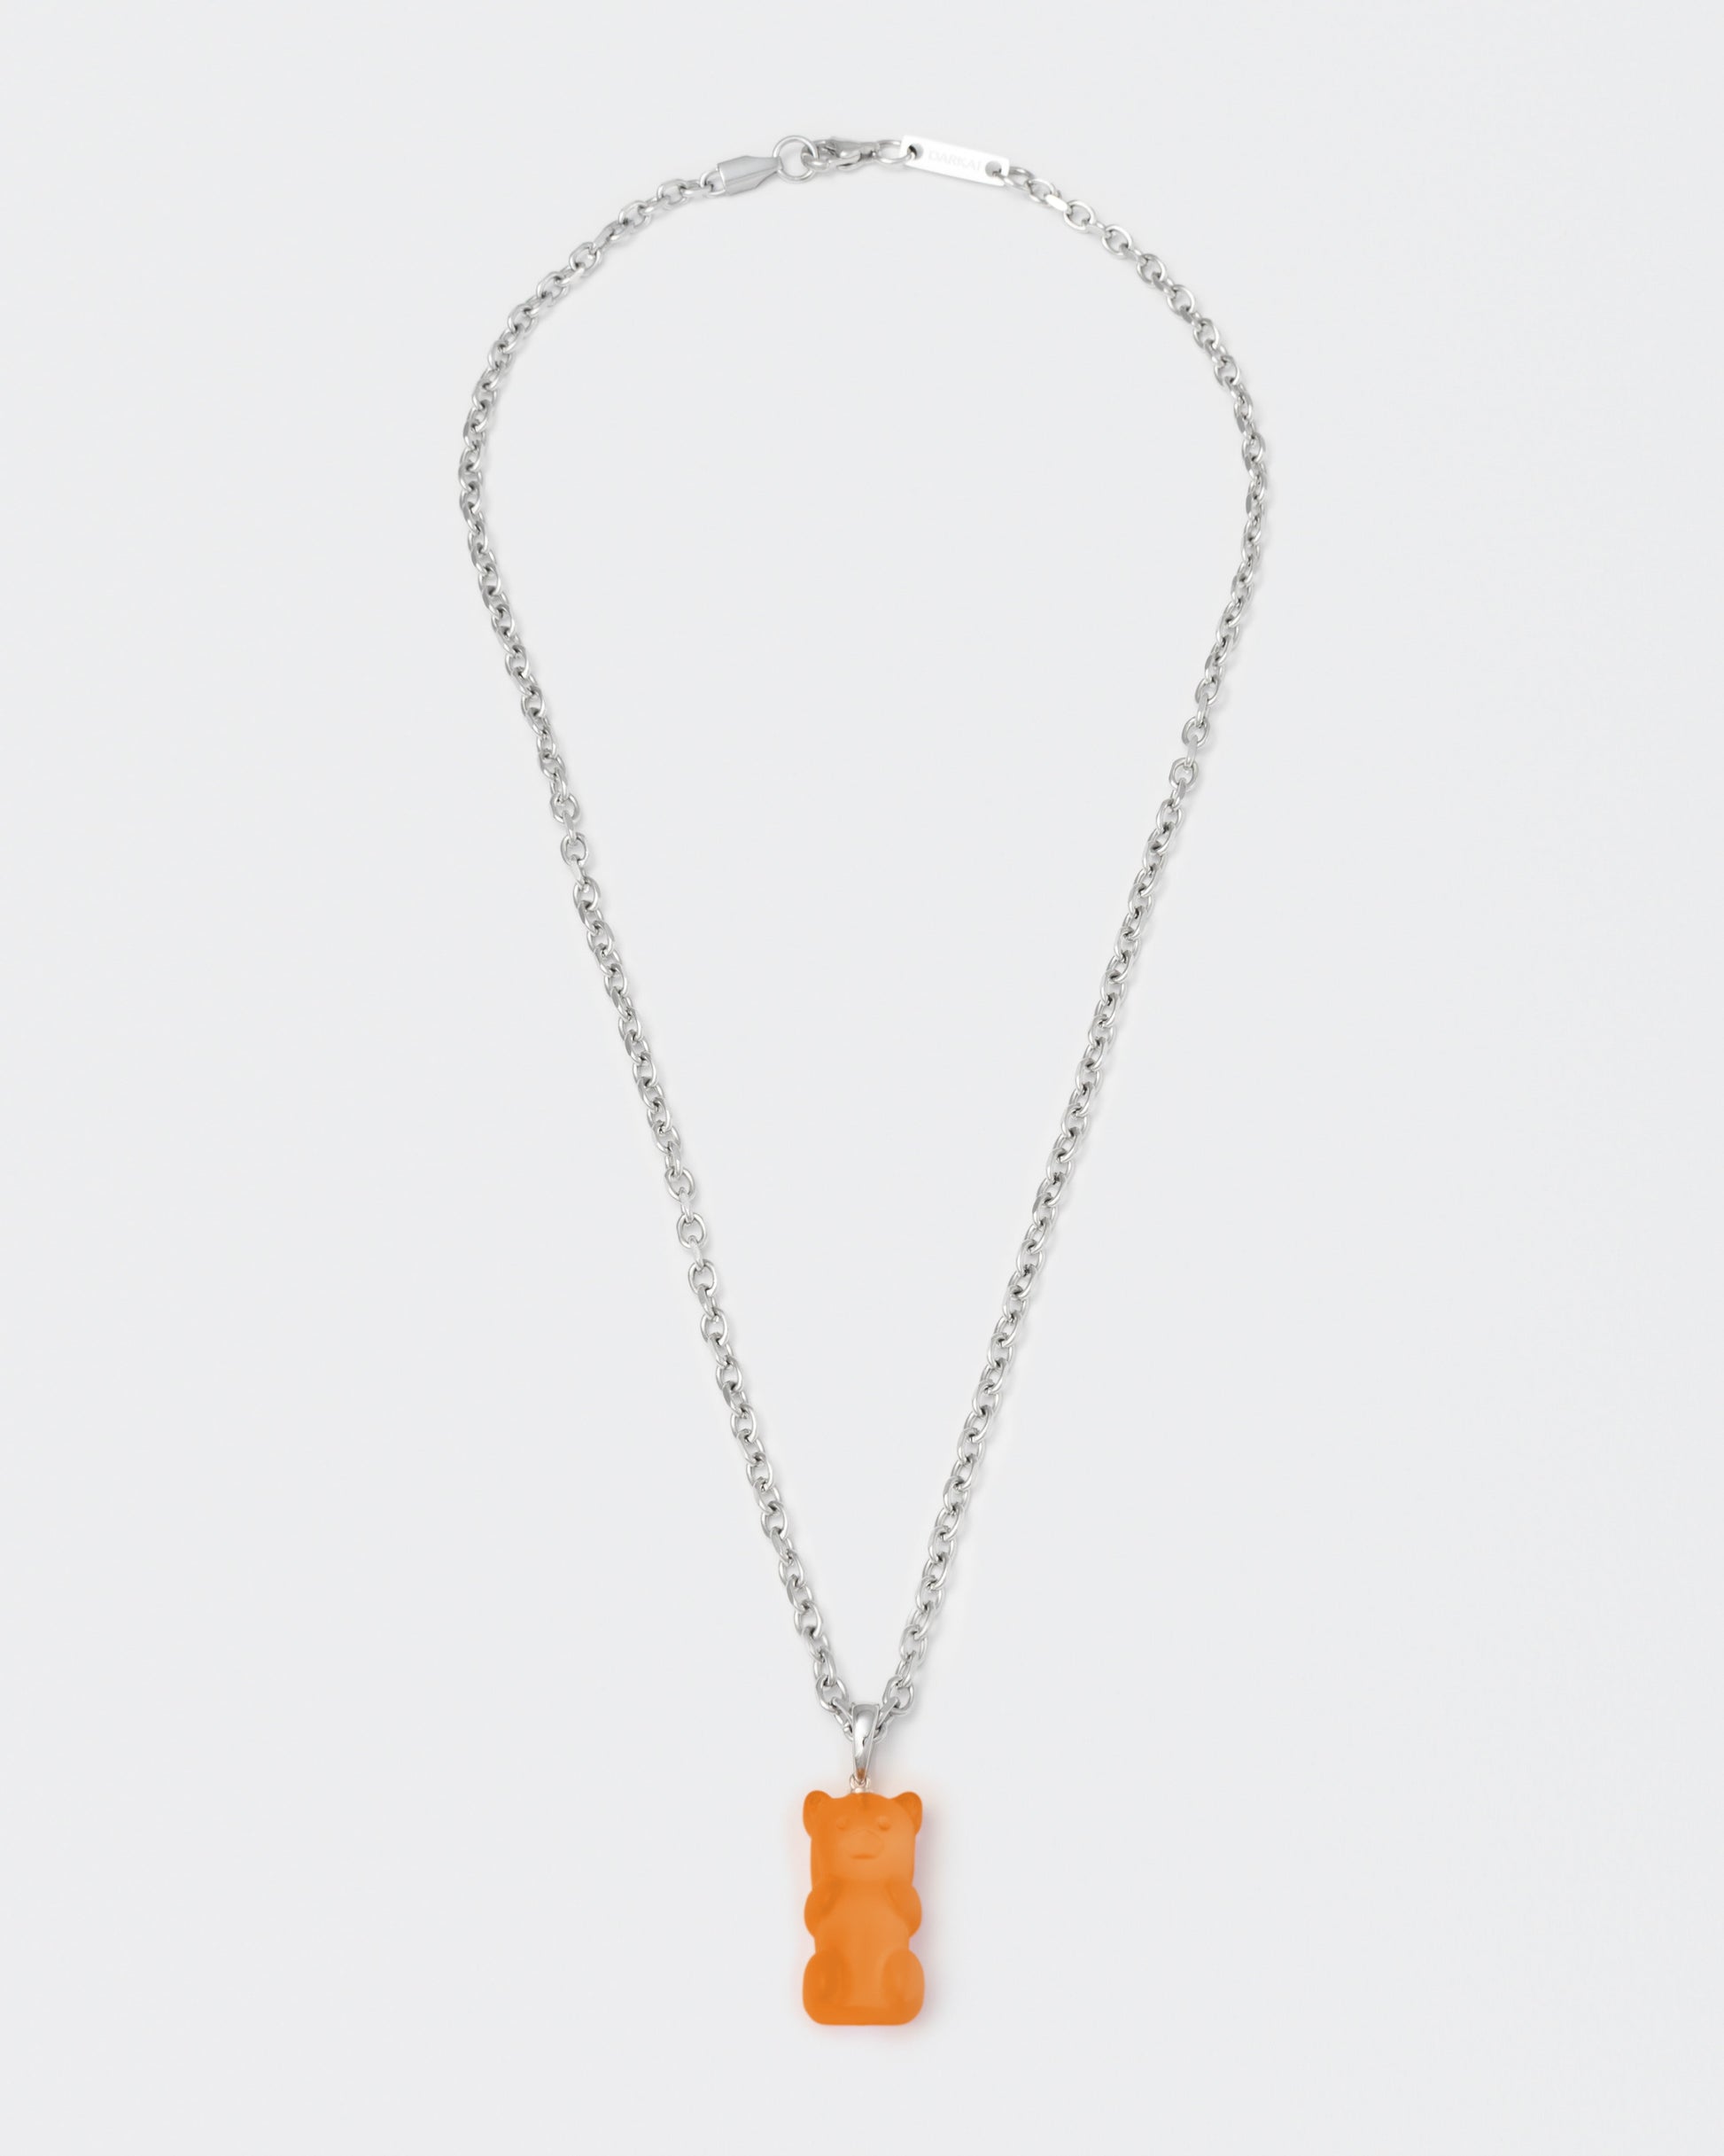 18k white gold coated gummy bear pendant necklace with 3D cut sandblasted crystal in orange and 3mm rolo chain